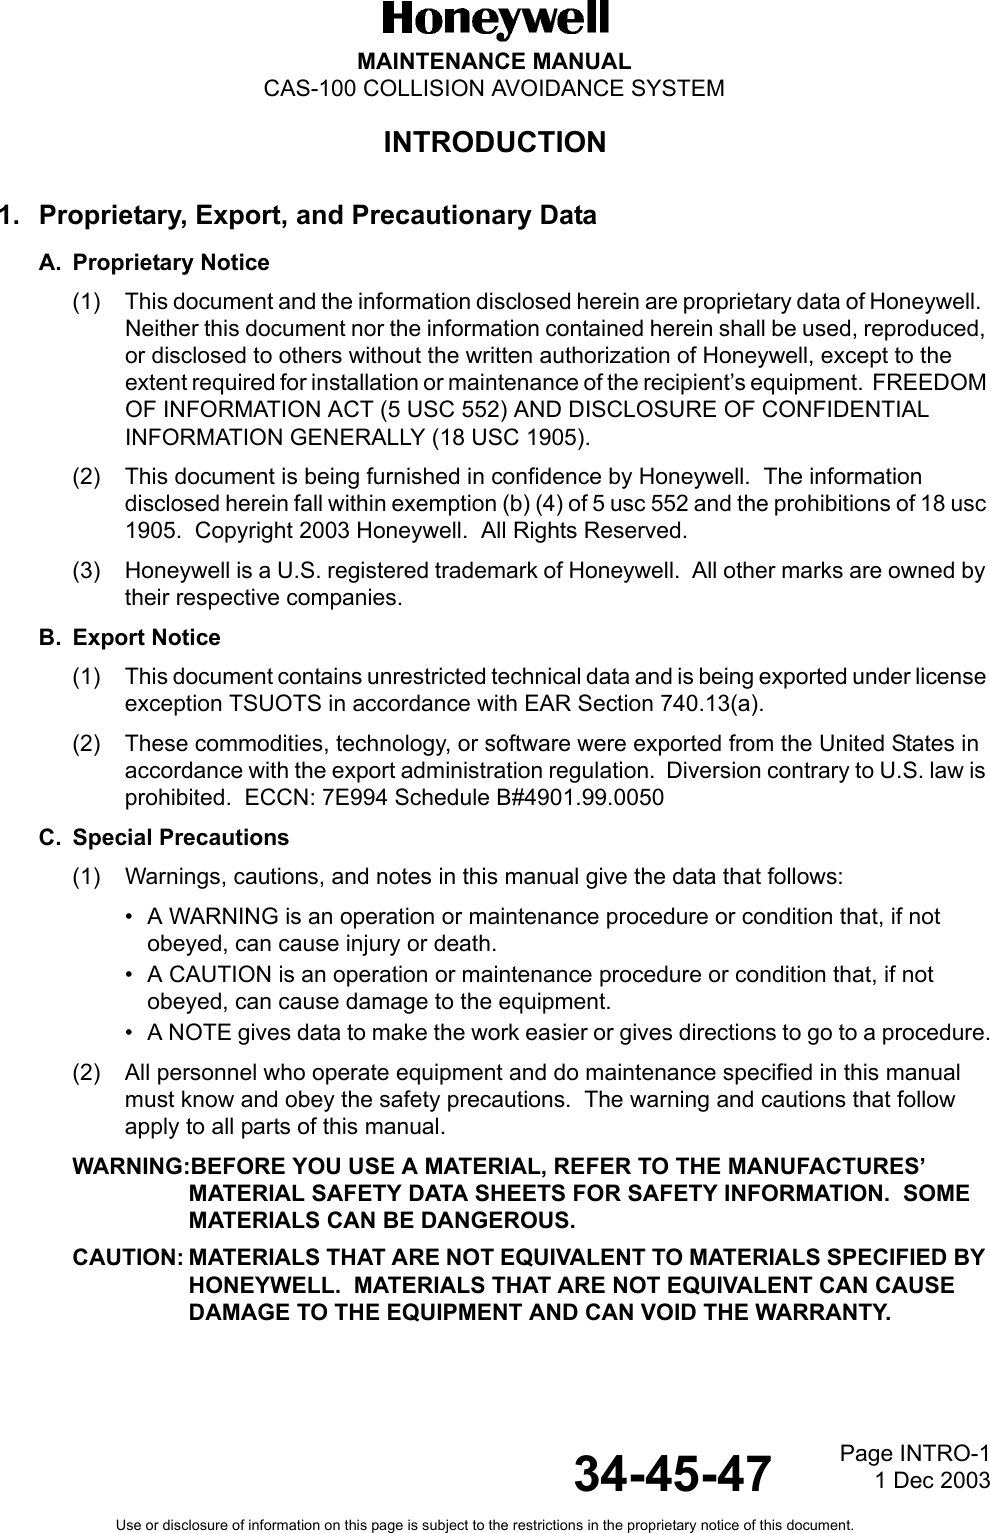 Page INTRO-11 Dec 2003MAINTENANCE MANUALCAS-100 COLLISION AVOIDANCE SYSTEMUse or disclosure of information on this page is subject to the restrictions in the proprietary notice of this document.34-45-471. Proprietary, Export, and Precautionary DataA. Proprietary Notice(1) This document and the information disclosed herein are proprietary data of Honeywell.  Neither this document nor the information contained herein shall be used, reproduced, or disclosed to others without the written authorization of Honeywell, except to the extent required for installation or maintenance of the recipient’s equipment.  FREEDOM OF INFORMATION ACT (5 USC 552) AND DISCLOSURE OF CONFIDENTIAL INFORMATION GENERALLY (18 USC 1905).(2) This document is being furnished in confidence by Honeywell.  The information disclosed herein fall within exemption (b) (4) of 5 usc 552 and the prohibitions of 18 usc 1905.  Copyright 2003 Honeywell.  All Rights Reserved.(3) Honeywell is a U.S. registered trademark of Honeywell.  All other marks are owned by their respective companies.B. Export Notice(1) This document contains unrestricted technical data and is being exported under license exception TSUOTS in accordance with EAR Section 740.13(a).(2) These commodities, technology, or software were exported from the United States in accordance with the export administration regulation.  Diversion contrary to U.S. law is prohibited.  ECCN: 7E994 Schedule B#4901.99.0050C. Special Precautions(1) Warnings, cautions, and notes in this manual give the data that follows:• A WARNING is an operation or maintenance procedure or condition that, if not obeyed, can cause injury or death.• A CAUTION is an operation or maintenance procedure or condition that, if not obeyed, can cause damage to the equipment.• A NOTE gives data to make the work easier or gives directions to go to a procedure.(2) All personnel who operate equipment and do maintenance specified in this manual must know and obey the safety precautions.  The warning and cautions that follow apply to all parts of this manual.WARNING:BEFORE YOU USE A MATERIAL, REFER TO THE MANUFACTURES’ MATERIAL SAFETY DATA SHEETS FOR SAFETY INFORMATION.  SOME MATERIALS CAN BE DANGEROUS.CAUTION: MATERIALS THAT ARE NOT EQUIVALENT TO MATERIALS SPECIFIED BY HONEYWELL.  MATERIALS THAT ARE NOT EQUIVALENT CAN CAUSE DAMAGE TO THE EQUIPMENT AND CAN VOID THE WARRANTY.INTRODUCTION